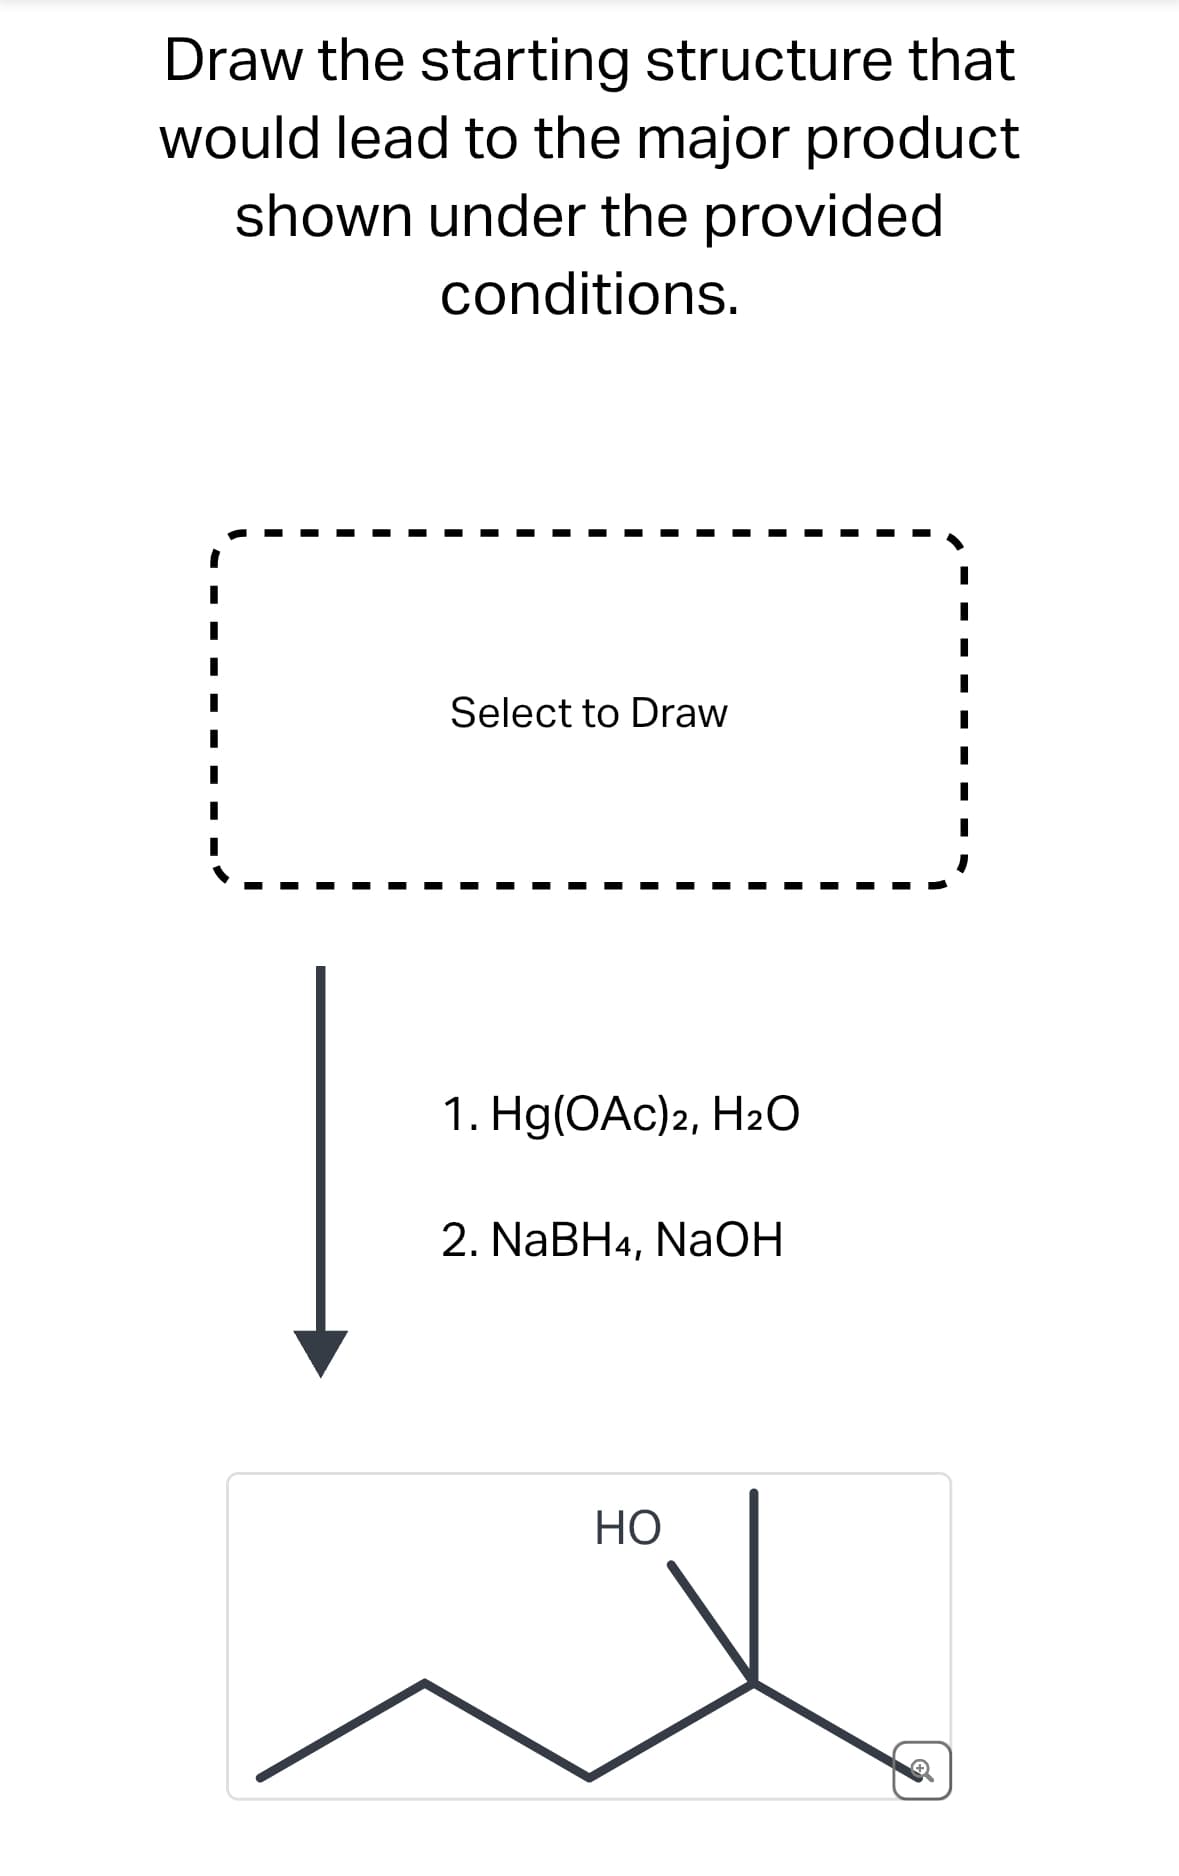 Draw the starting structure that
would lead to the major product
shown under the provided
conditions.
Select to Draw
1. Hg(OAc)2, H2O
2. NaBH4, NaOH
HO